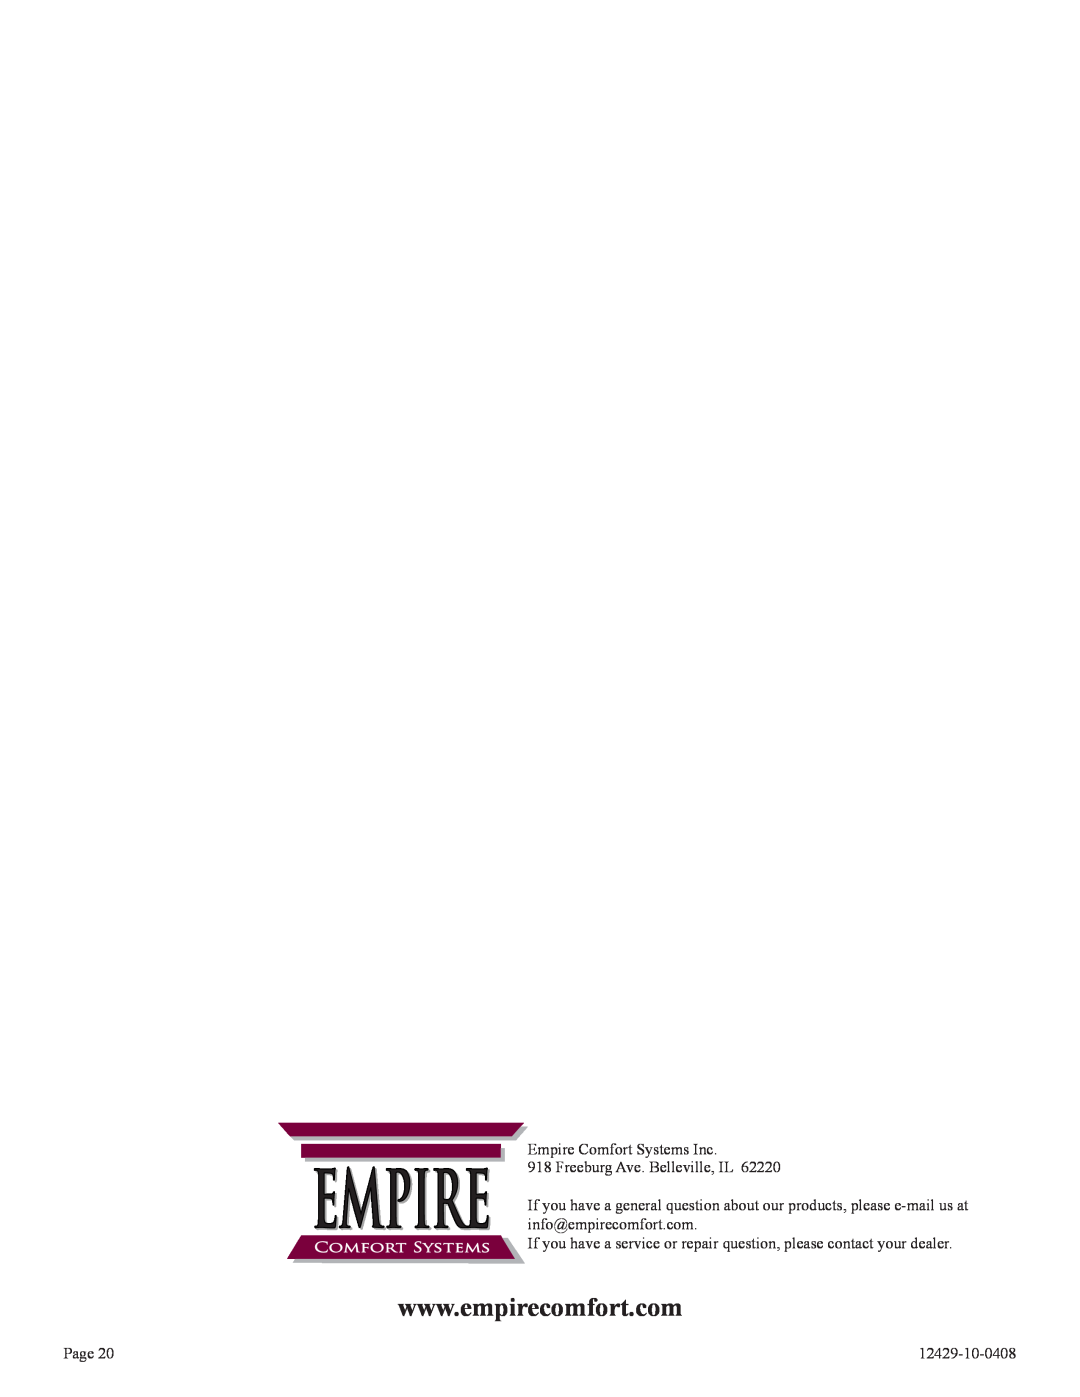 Empire Products FAW-55IP Empire Comfort Systems Inc, EMPIRE 918 Freeburg Ave. Belleville, IL, Page, 12429-10-0408 